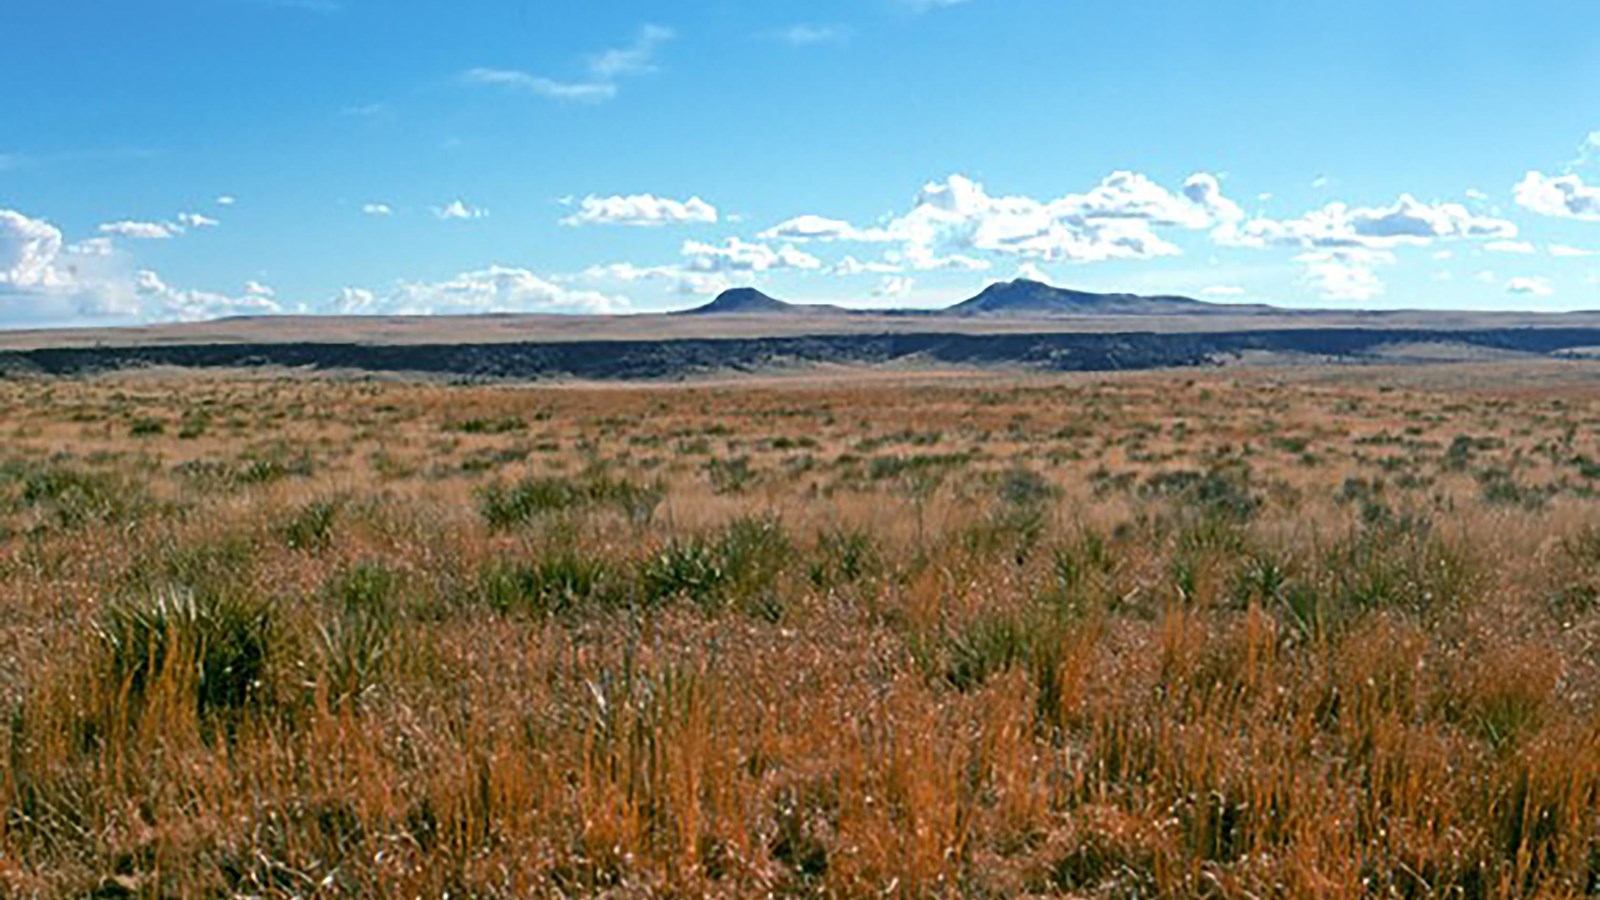 Grassland with double-peaked mountain in the distance 